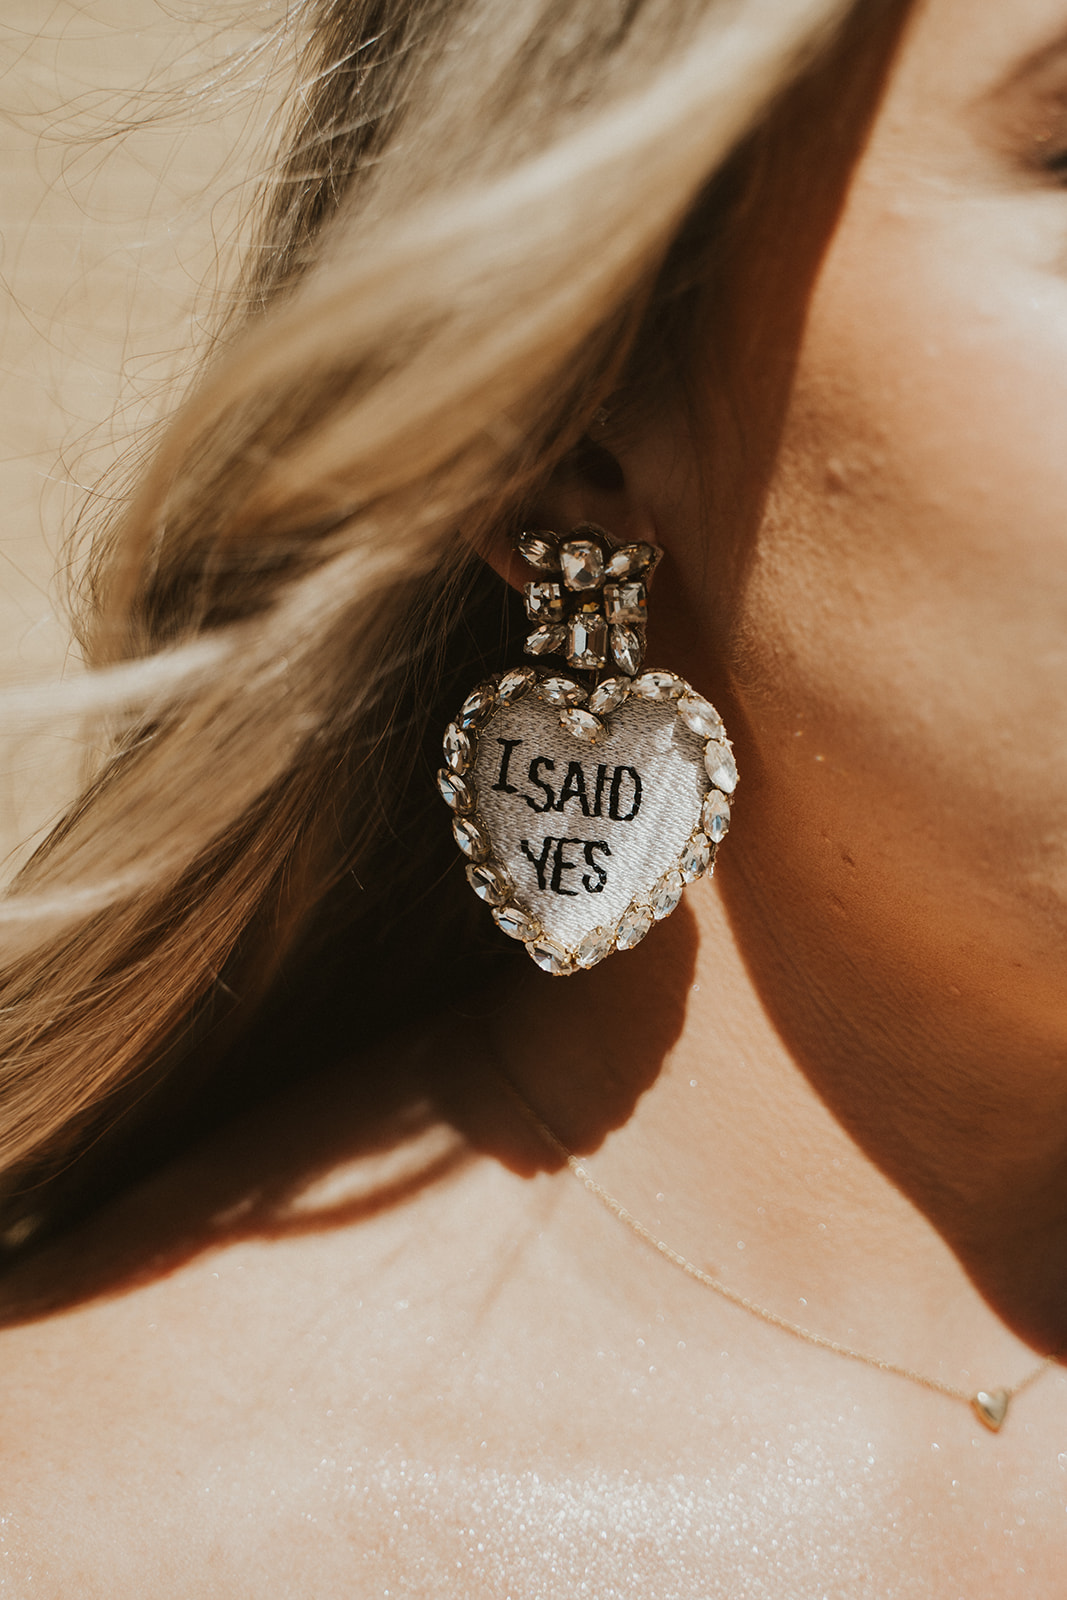 bride-to-be's "I said yes" earrings